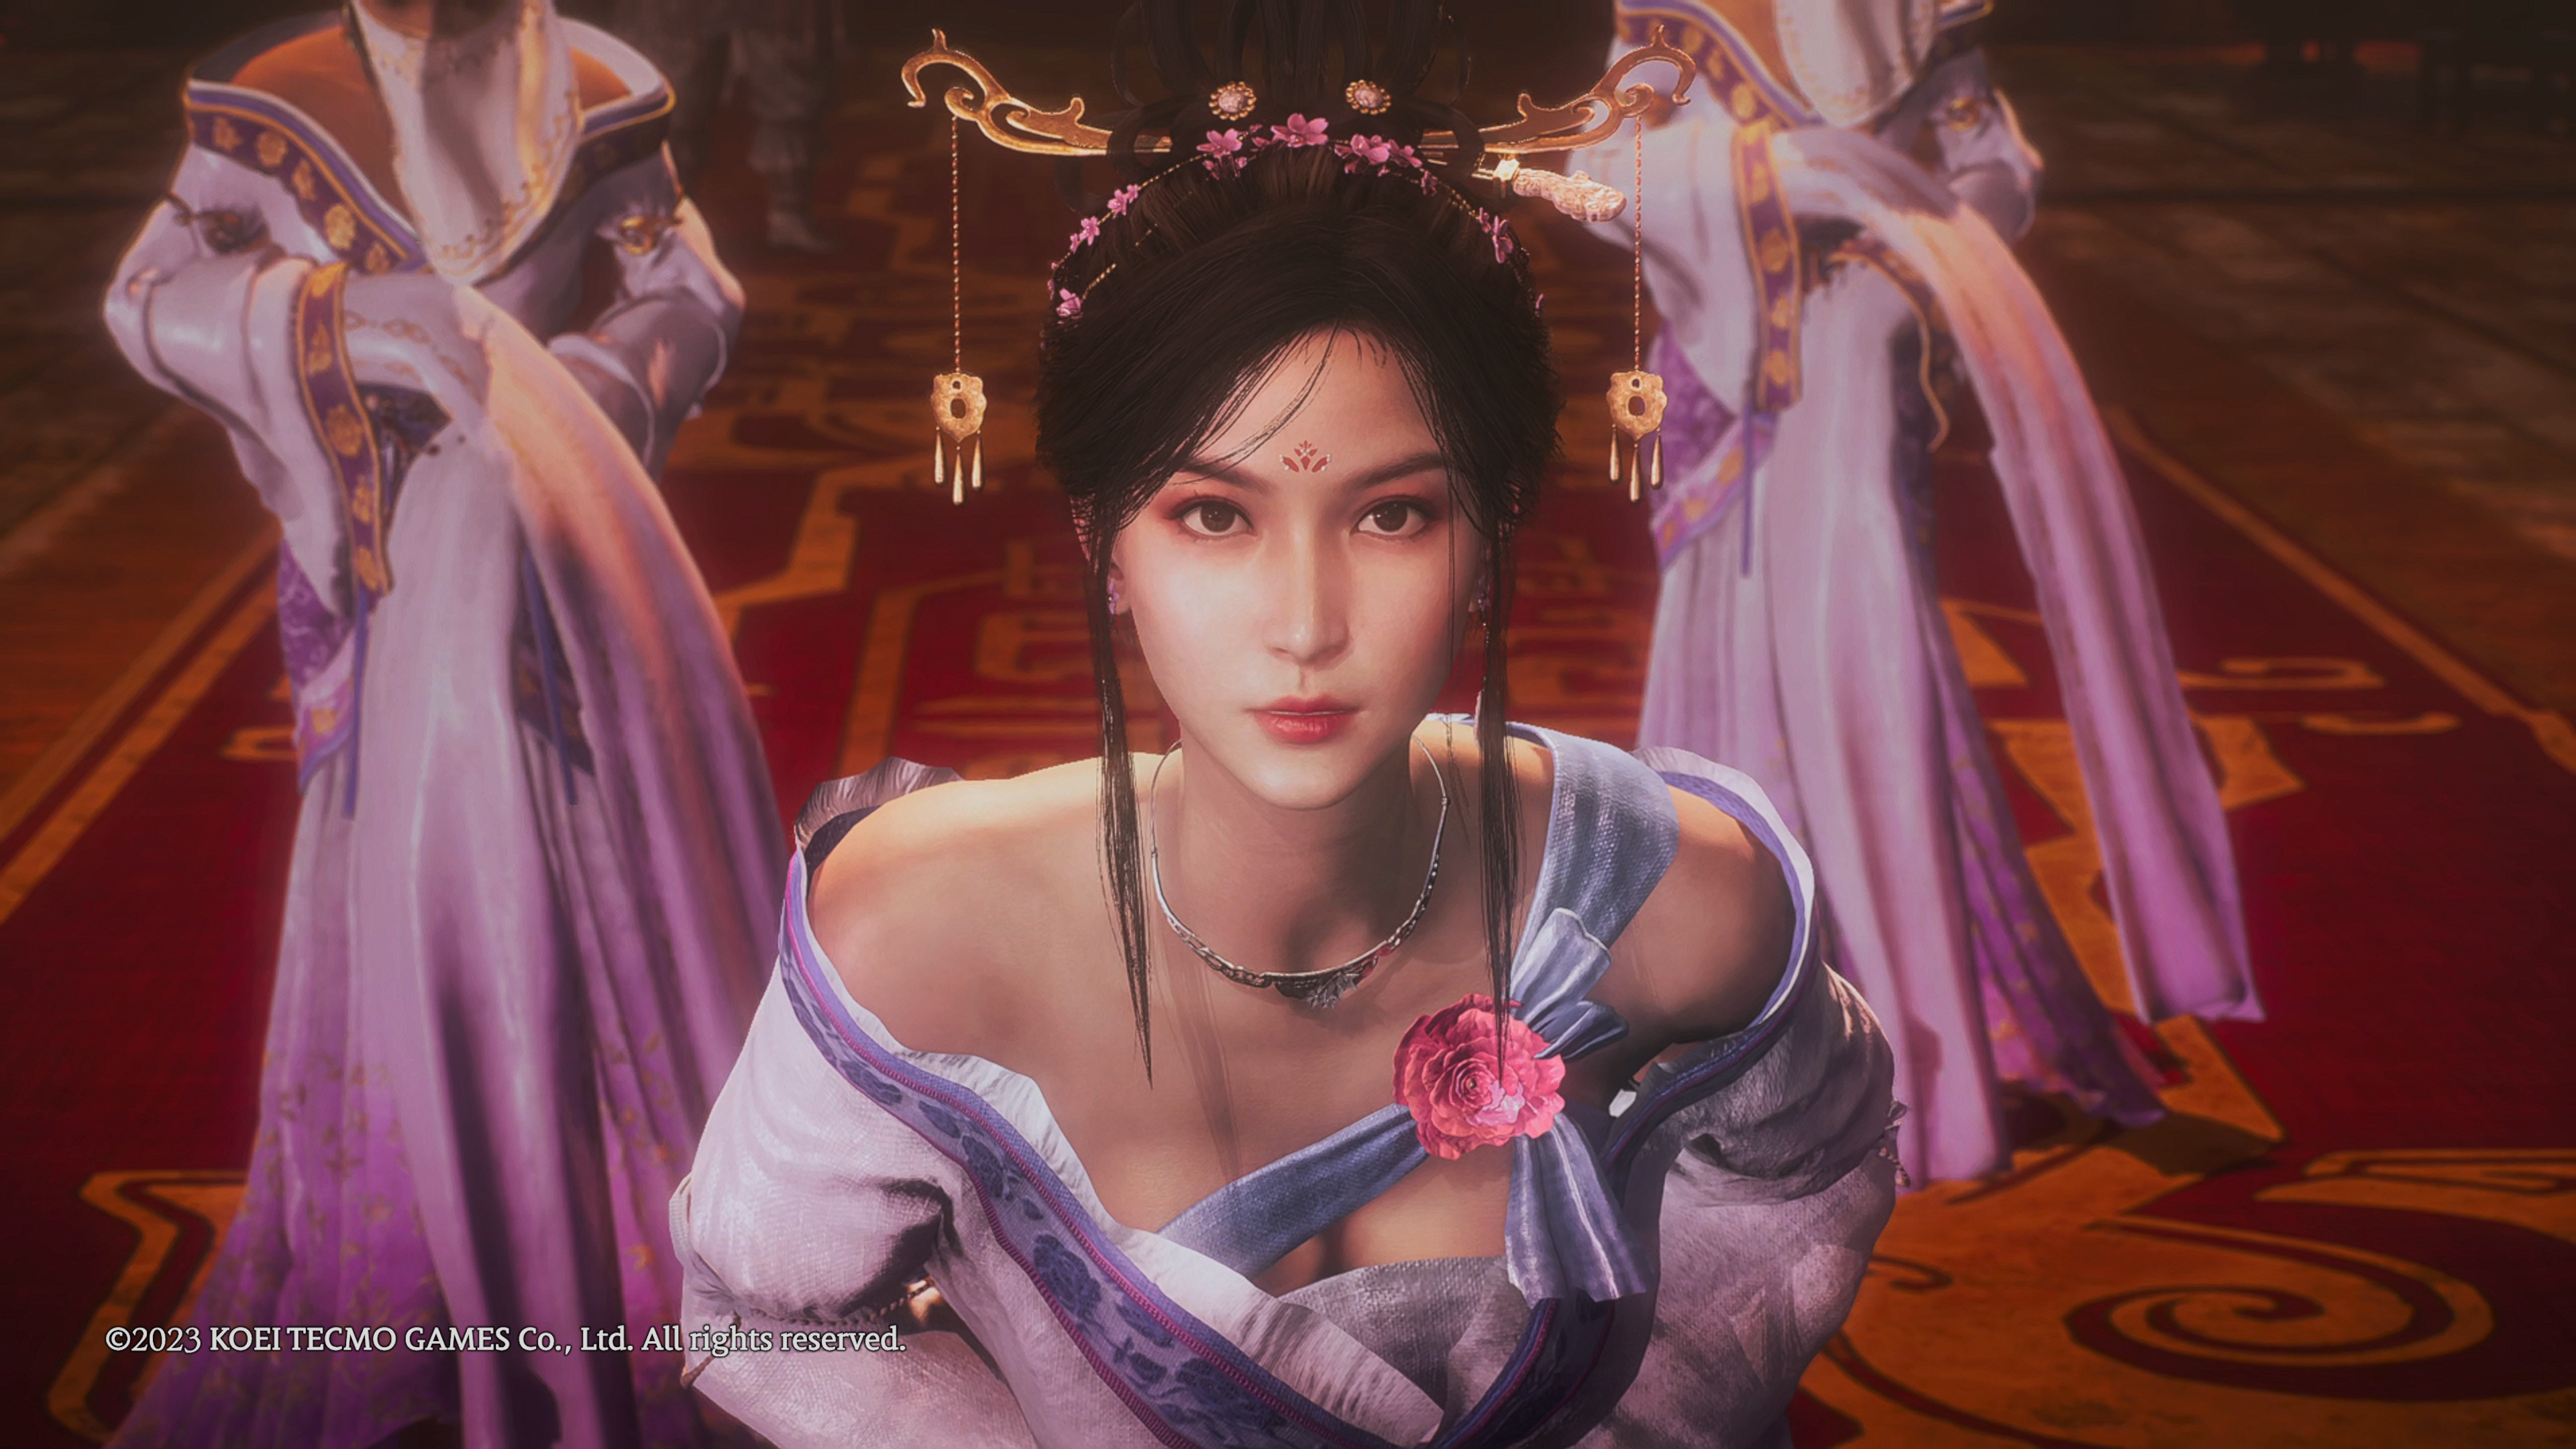 Wo Long Fallen Dynasty - a princess-like character in pink bowing towards the camera